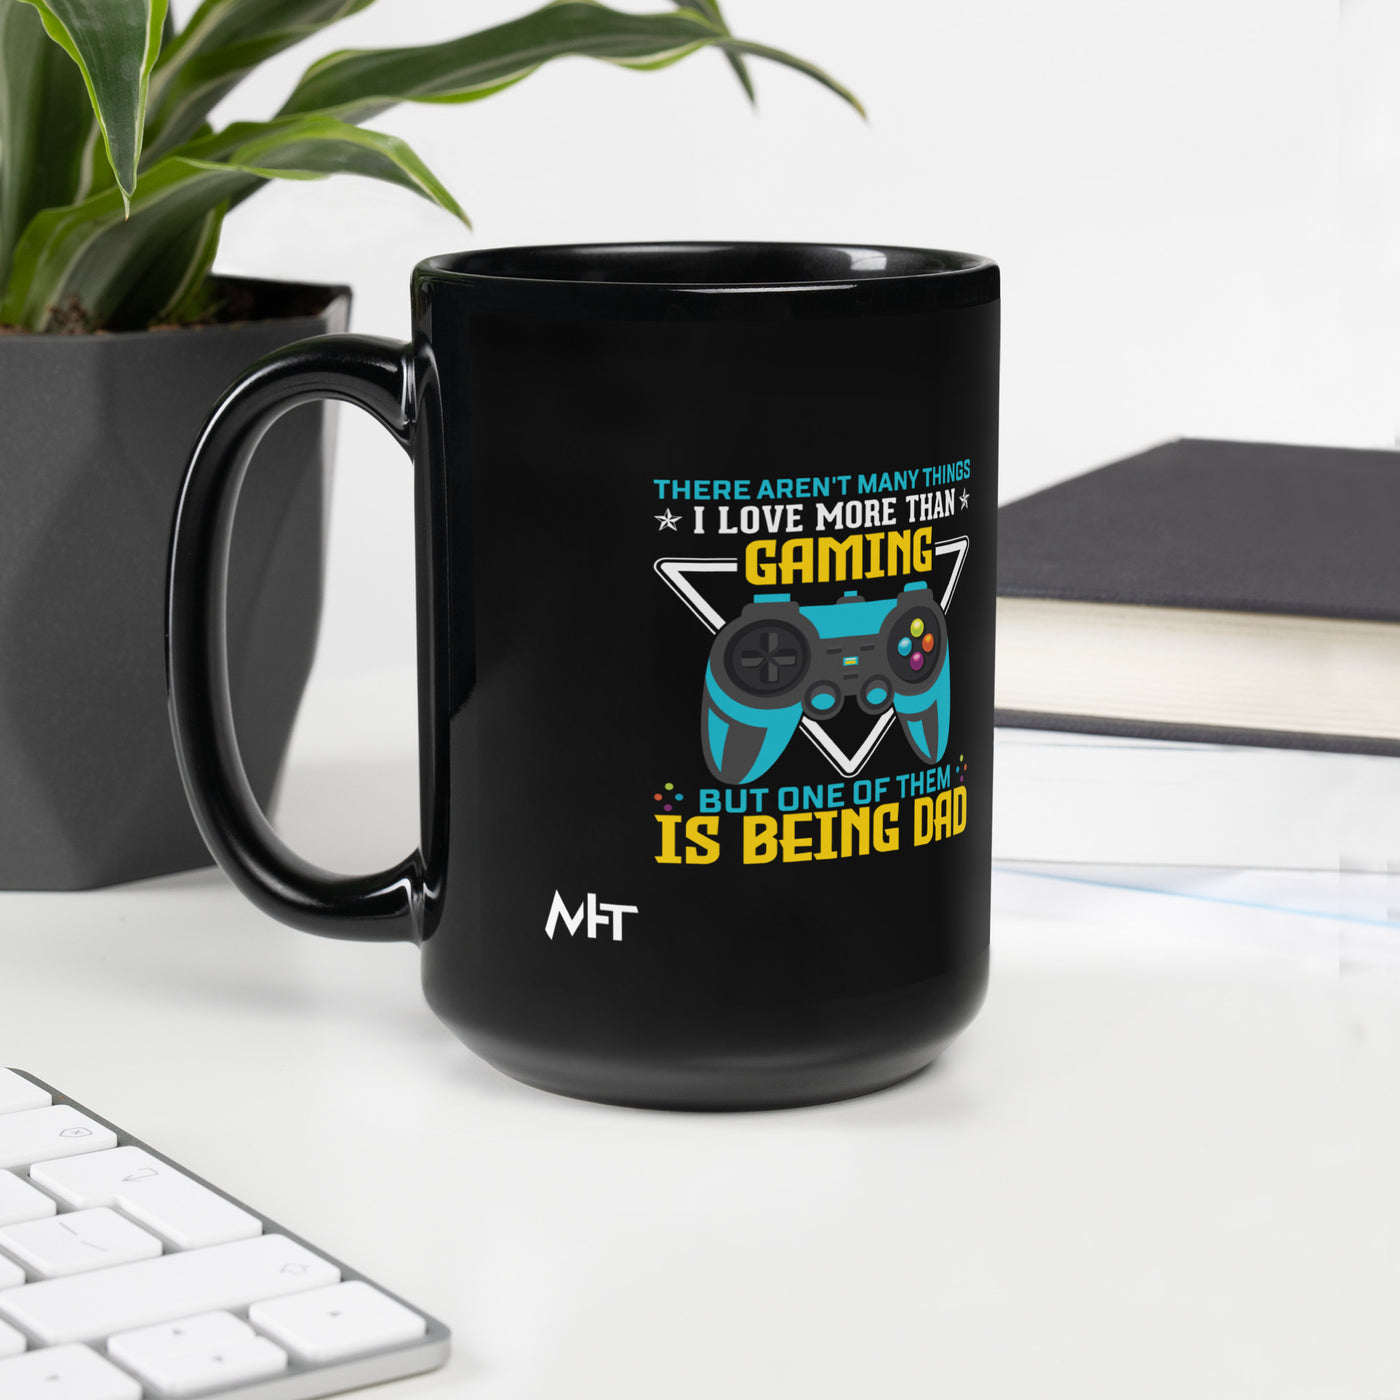 There aren't many things I Love more than Gaming ( rasel ) - Black Glossy Mug